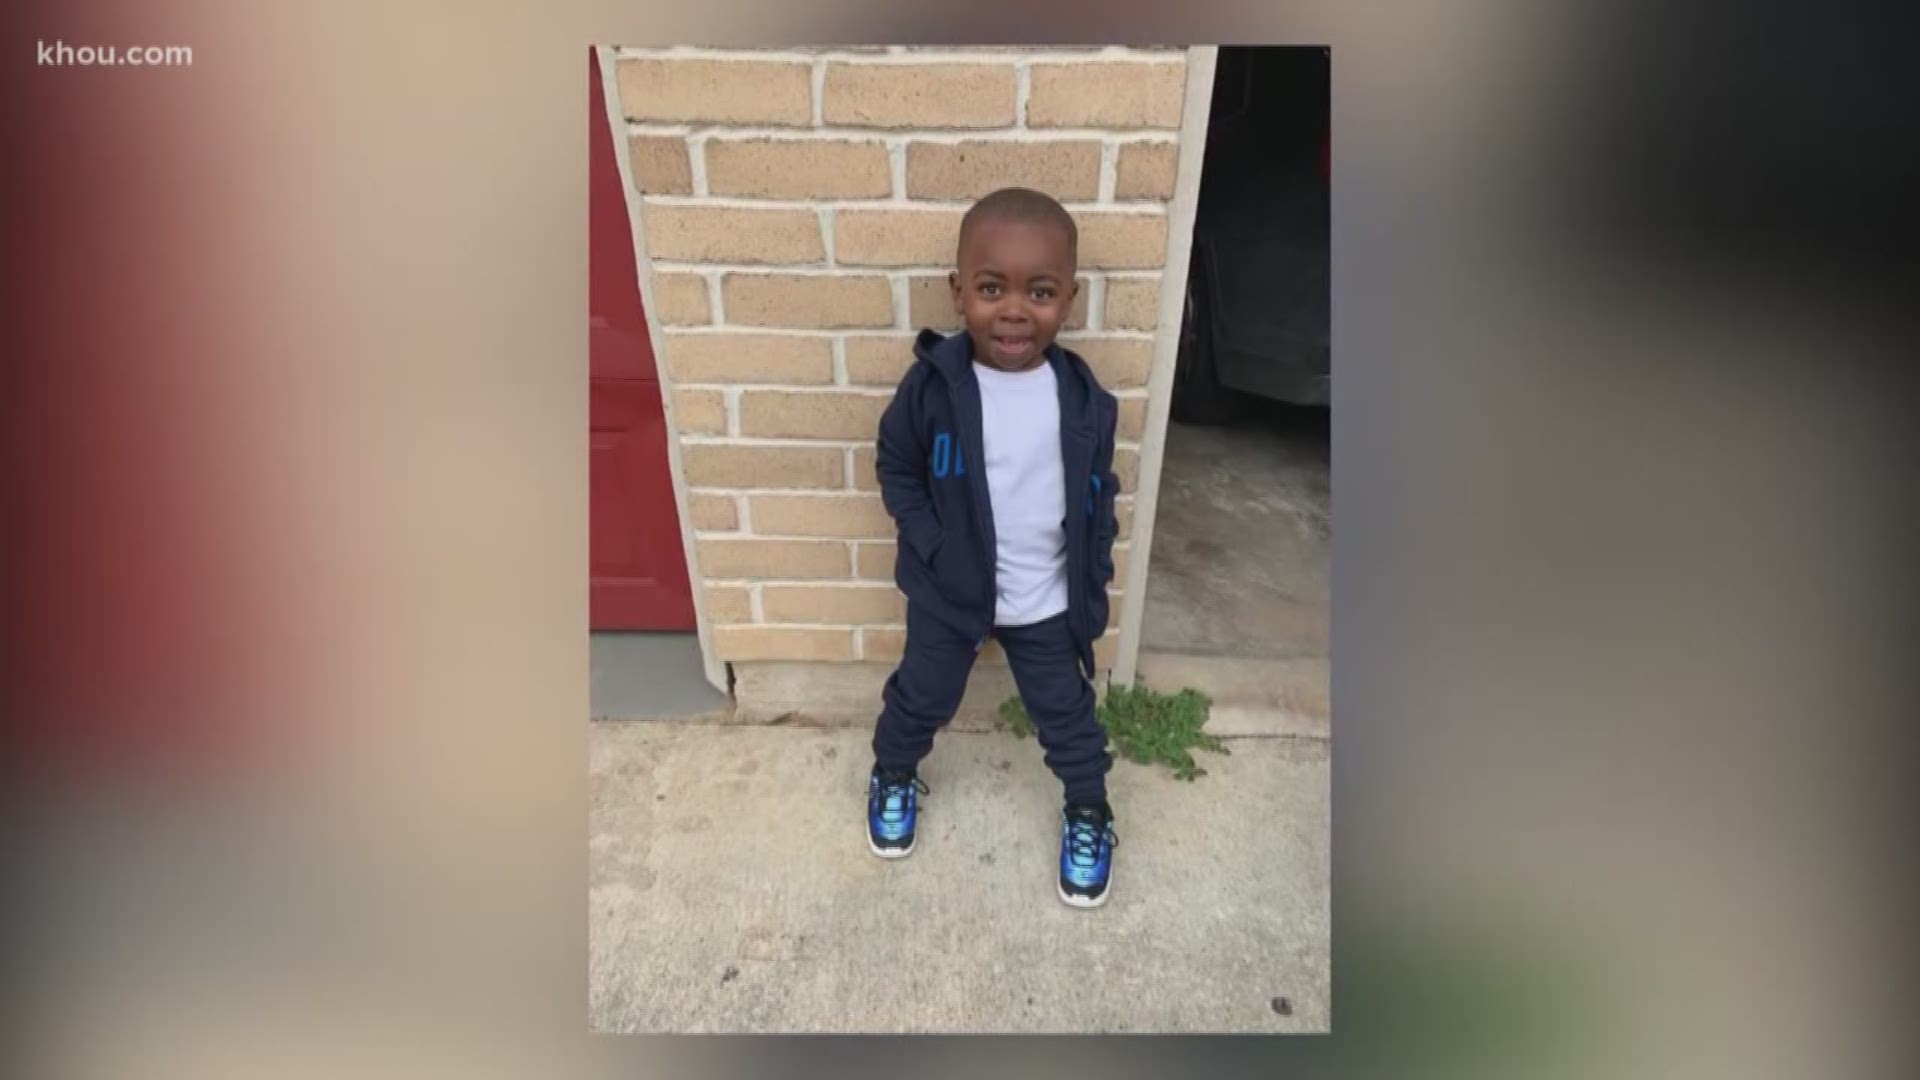 A 2-year-old boy was fatally shot and two other men were wounded in a home invasion and robbery in Spring, according to the Harris County Sheriff’s Office.